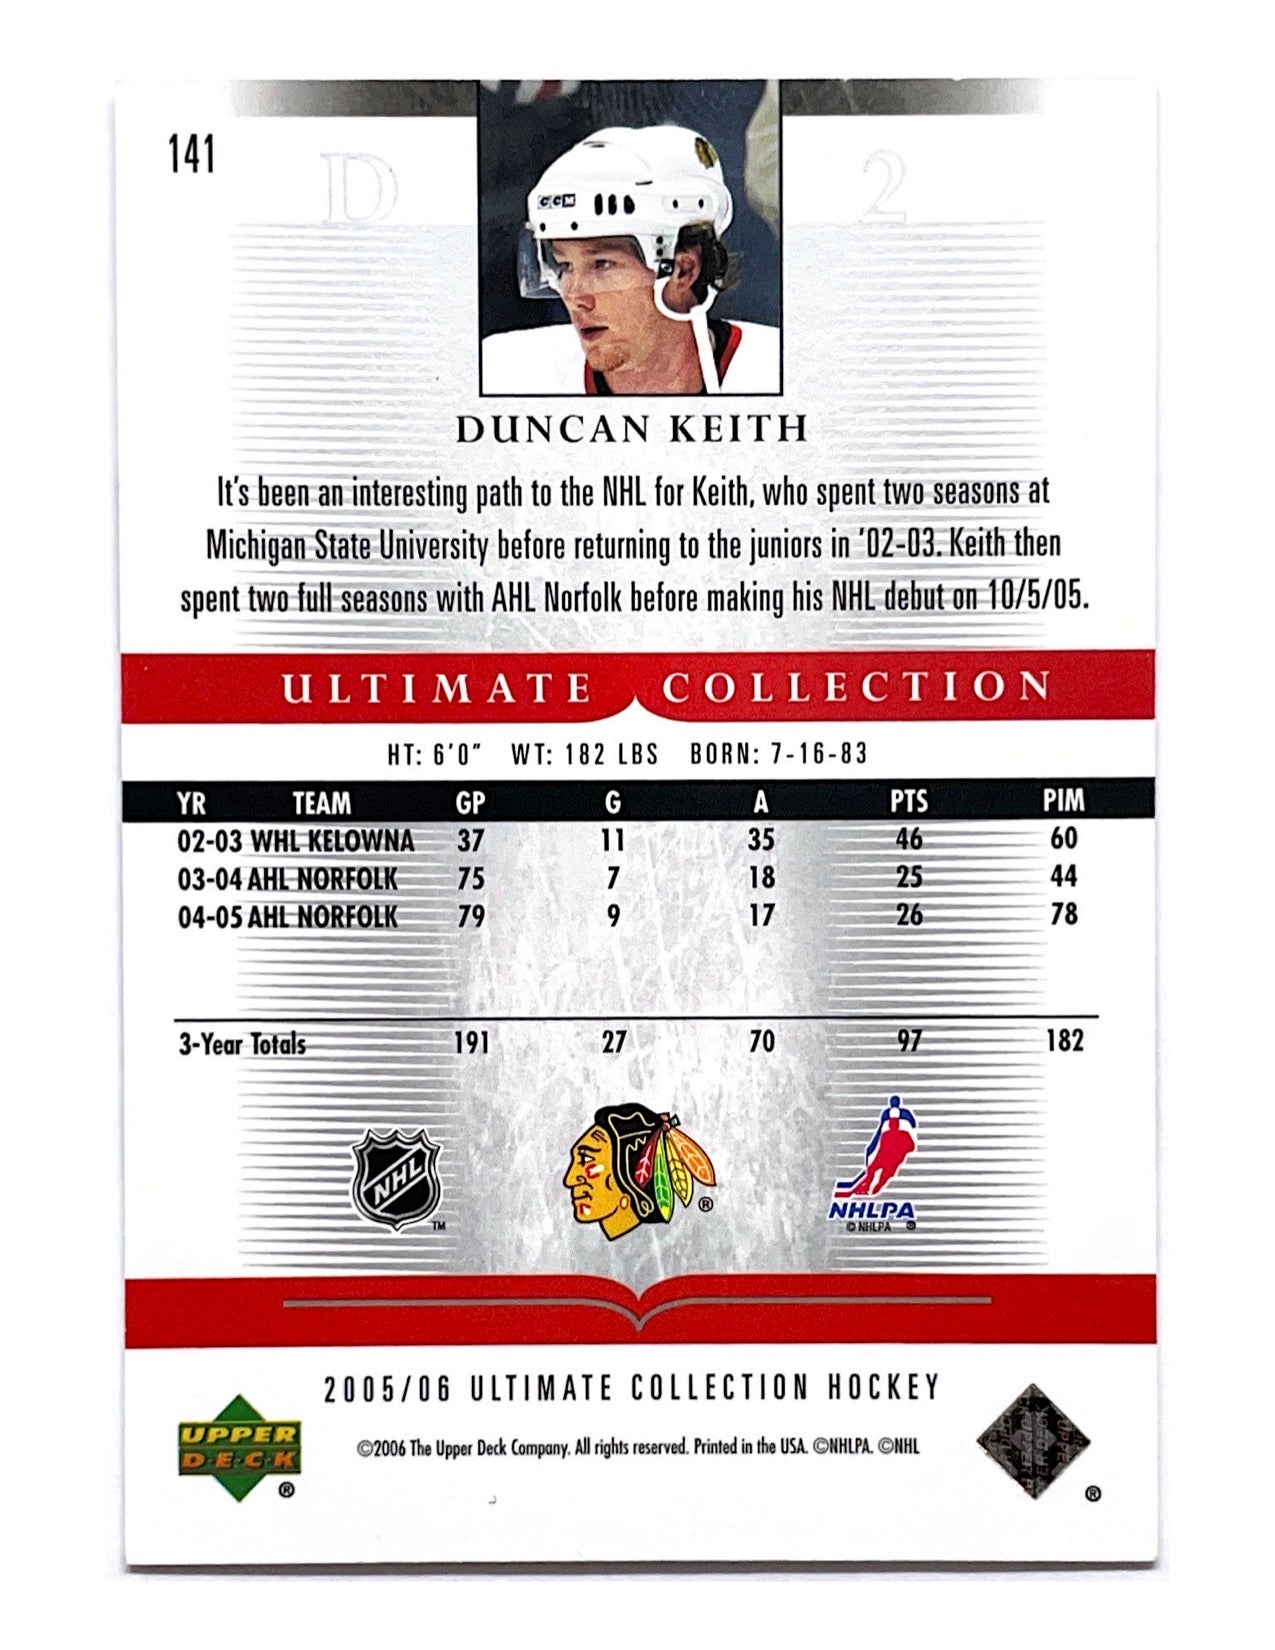 Duncan Keith 2005-06 Upper Deck Ultimate Collection Ultimate Rookie #141 - 437/599